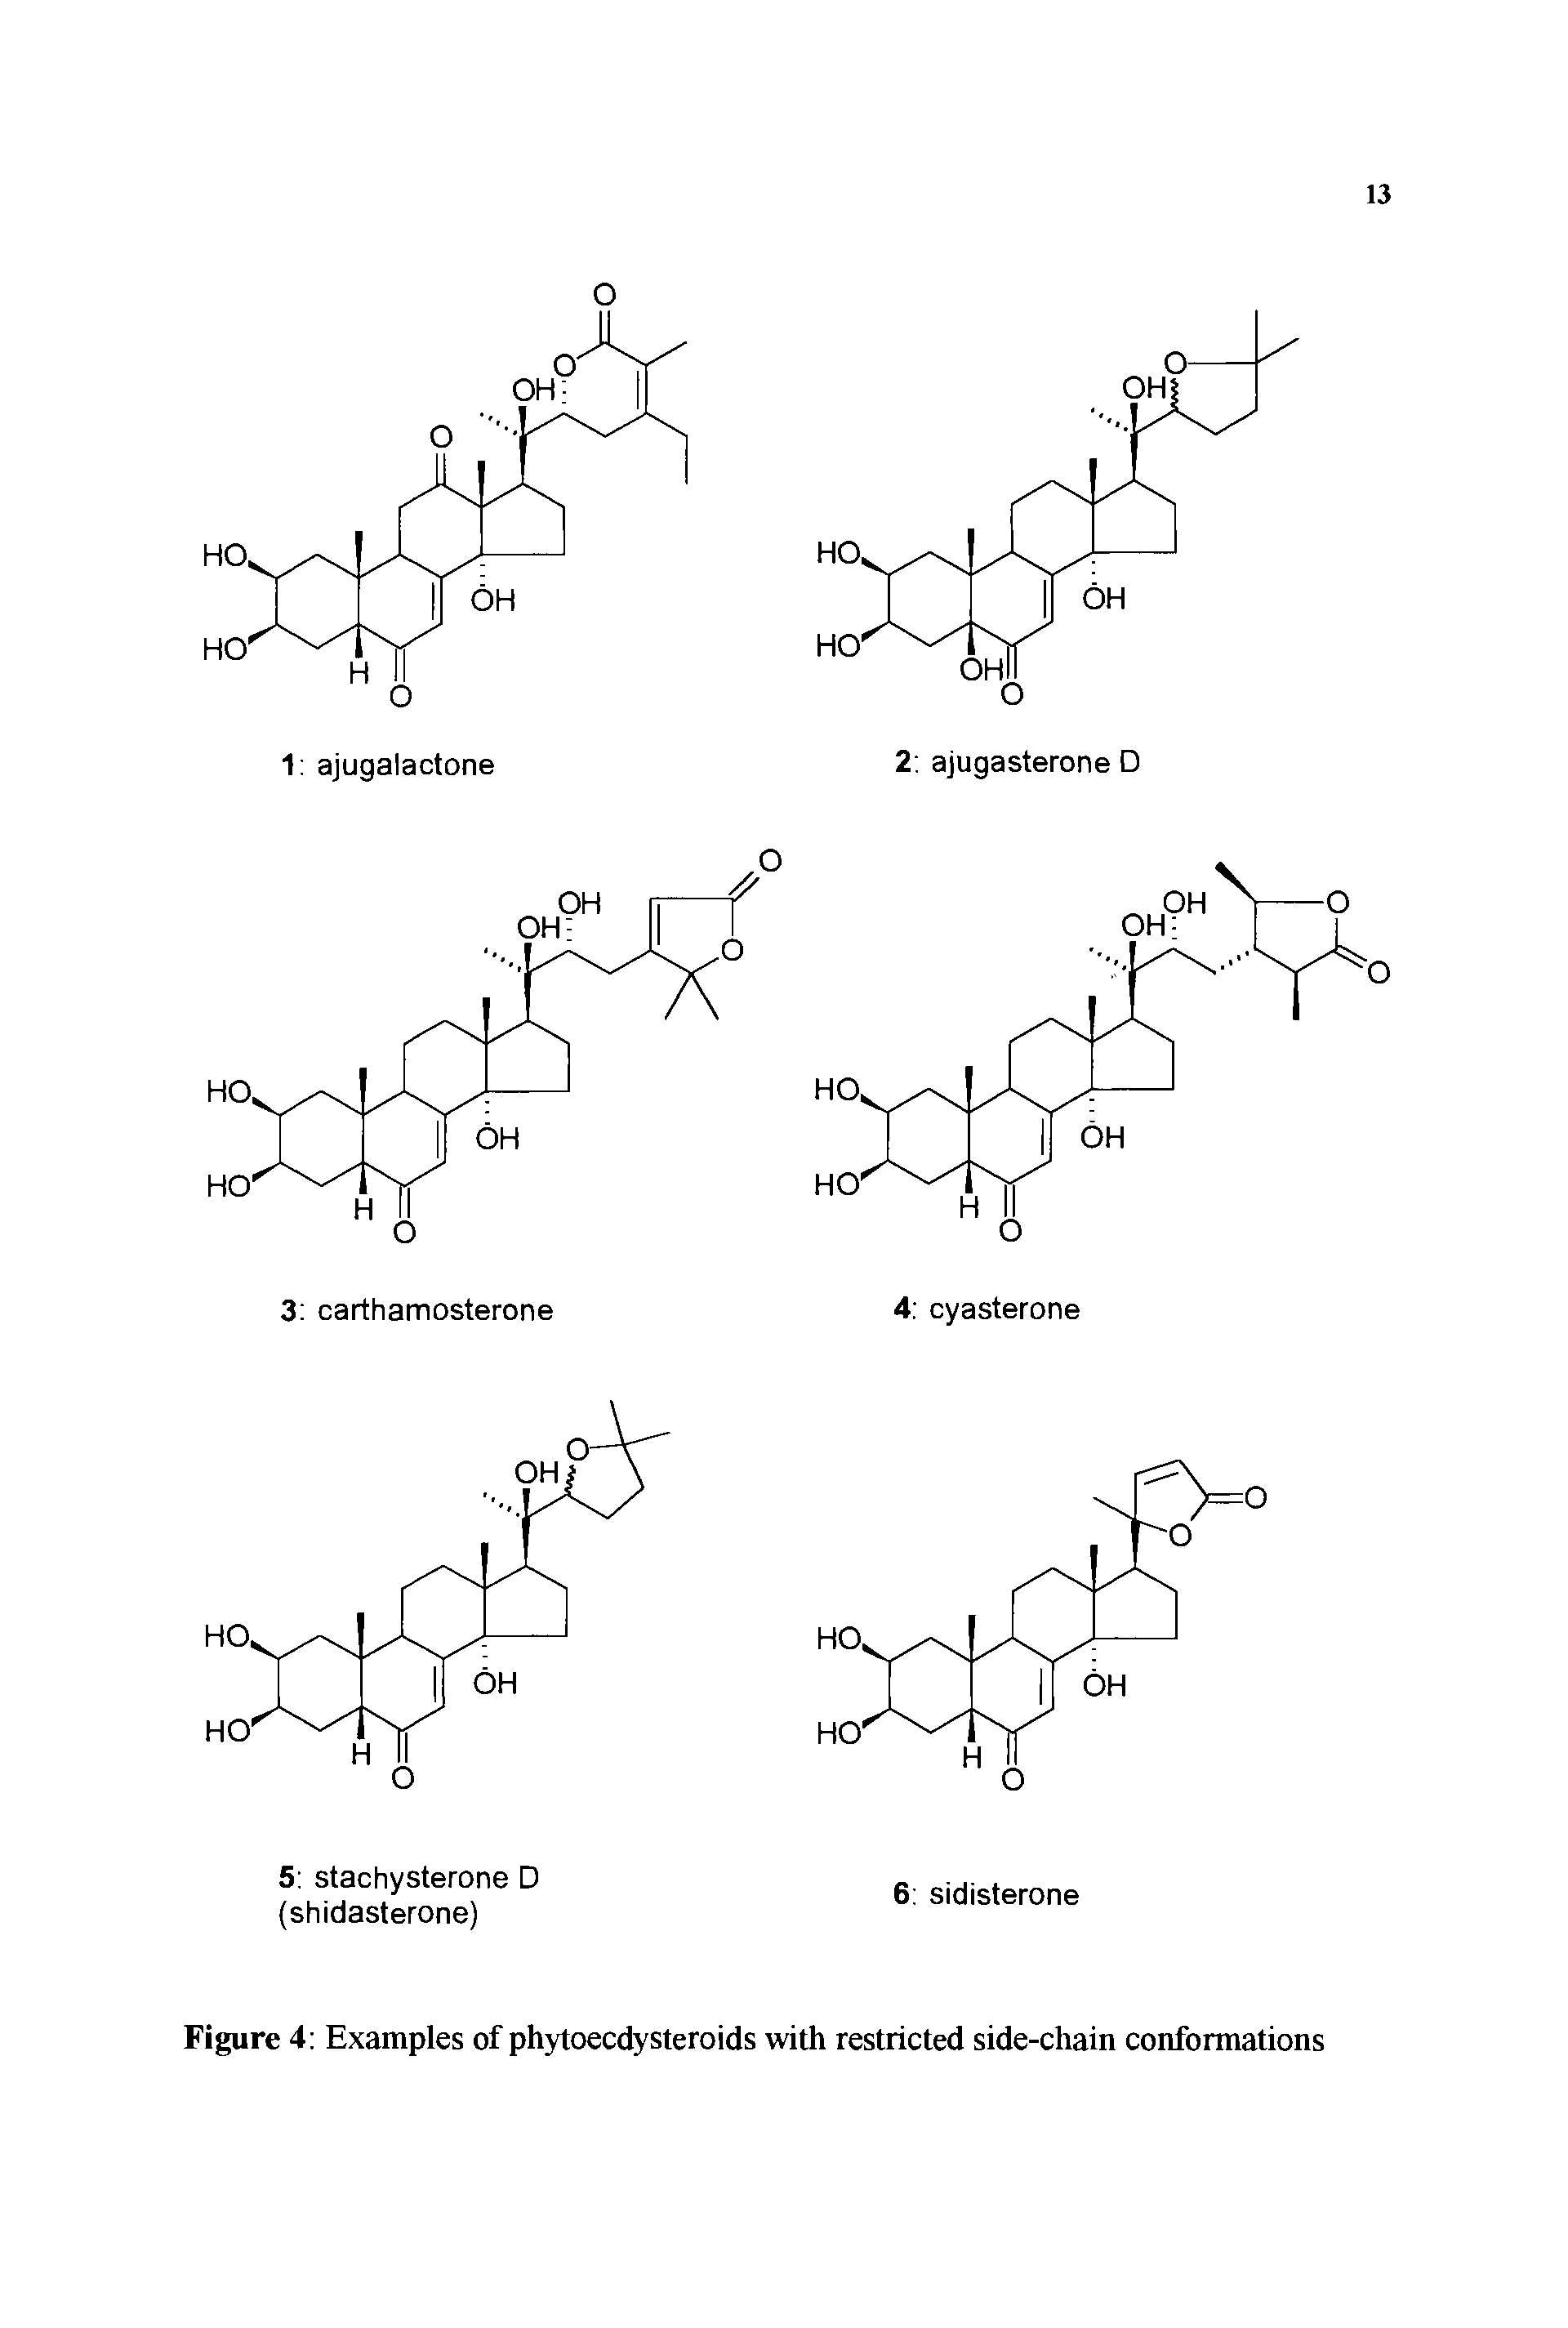 Figure 4 Examples of phytoecdysteroids with restricted side-chain conformations...